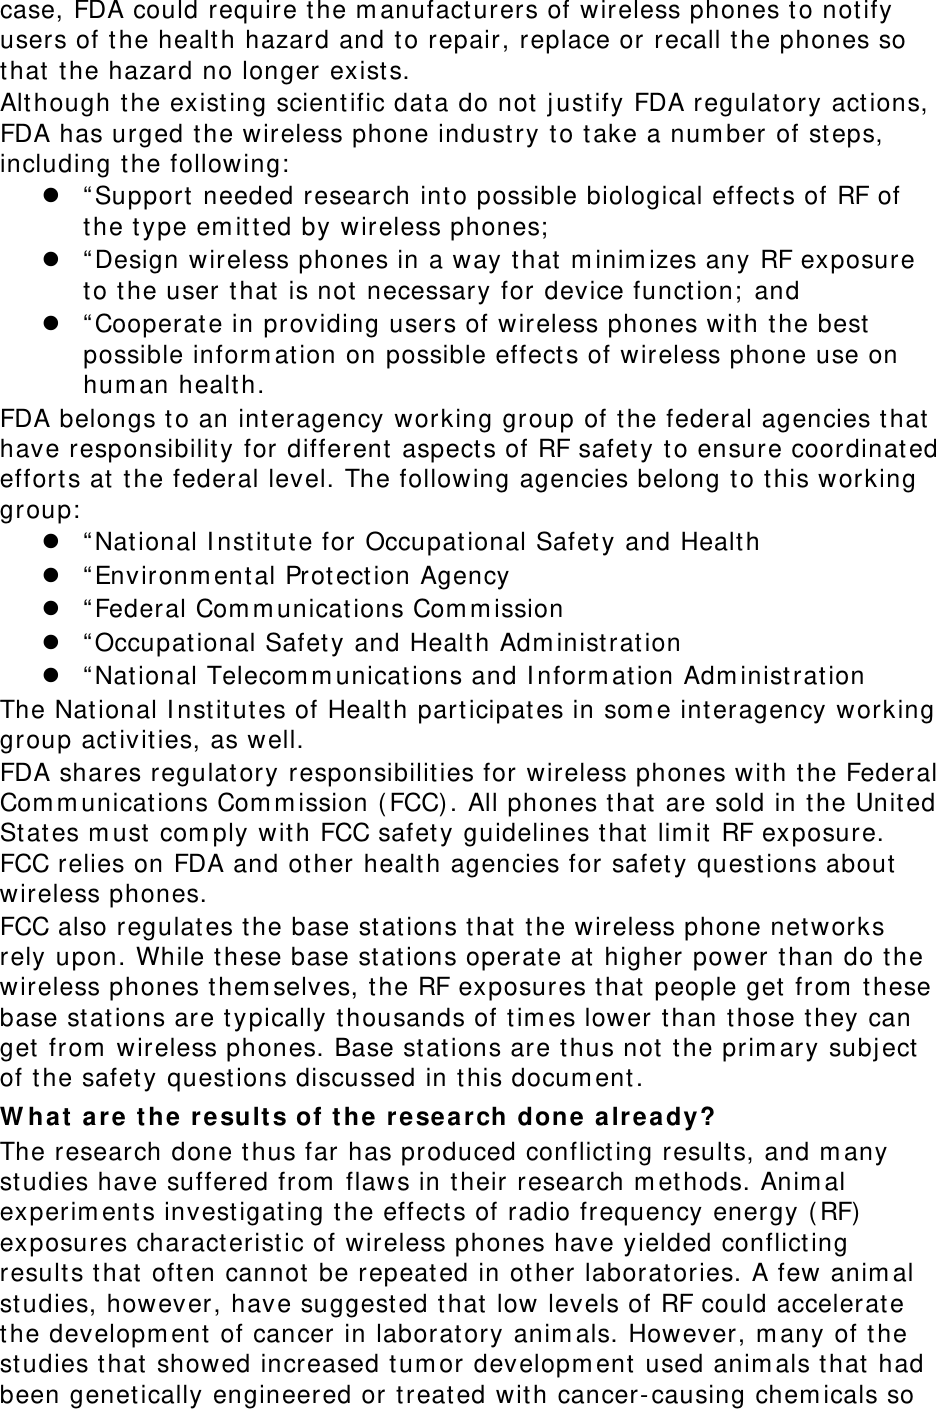 case, FDA could require t he m anufacturers of wireless phones t o not ify users of t he healt h hazard and t o repair, replace or recall the phones so that  t he hazard no longer exist s. Although t he existing scient ific dat a do not  j ust ify FDA regulat ory act ions, FDA has urged t he wireless phone indust ry to take a num ber of st eps, including t he following:   “ Support needed research into possible biological effect s of RF of the t ype em itt ed by wireless phones;   “ Design wireless phones in a way that  m inim izes any RF exposure to the user t hat  is not  necessary for device funct ion;  and  “ Cooperat e in providing users of wireless phones wit h t he best possible inform at ion on possible effect s of wireless phone use on hum an healt h. FDA belongs t o an interagency working group of the federal agencies t hat  have responsibilit y for different  aspects of RF safet y t o ensure coordinat ed effort s at  the federal level. The following agencies belong to t his working group:   “ Nat ional I nst itute for Occupat ional Safety and Healt h  “ Environm ent al Protect ion Agency  “ Federal Com m unicat ions Com m ission  “ Occupat ional Safety and Healt h Adm inist rat ion  “ Nat ional Telecom m unicat ions and I nform at ion Adm inist rat ion The Nat ional I nst it utes of Healt h part icipates in som e interagency working group act ivit ies, as well. FDA shares regulat ory responsibilit ies for wireless phones wit h t he Federal Com m unicat ions Com m ission ( FCC). All phones that  are sold in t he Unit ed St ates m ust  com ply with FCC safet y guidelines t hat  lim it  RF exposure. FCC relies on FDA and ot her healt h agencies for safet y questions about  wireless phones. FCC also regulat es t he base st at ions t hat  the wireless phone networks rely upon. While t hese base st ations operate at  higher power t han do t he wireless phones t hem selves, t he RF exposures t hat  people get from  t hese base st ations are t ypically t housands of t im es lower t han those t hey can get  from  wireless phones. Base st at ions are t hus not  t he prim ary subj ect  of t he safet y quest ions discussed in t his docum ent . W h a t  a re t he r e sult s of t he  re sea r ch done a lre a dy? The research done t hus far has produced conflicting result s, and m any studies have suffered from  flaws in t heir research m et hods. Anim al experim ent s investigat ing t he effect s of radio frequency energy ( RF)  exposures characterist ic of wireless phones have yielded conflicting result s t hat  oft en cannot  be repeat ed in other laborat ories. A few anim al studies, however, have suggest ed t hat  low levels of RF could accelerate the developm ent  of cancer in laborat ory anim als. However, m any of t he studies t hat  showed increased t um or developm ent used anim als that  had been genetically engineered or t reat ed wit h cancer-causing chem icals so 